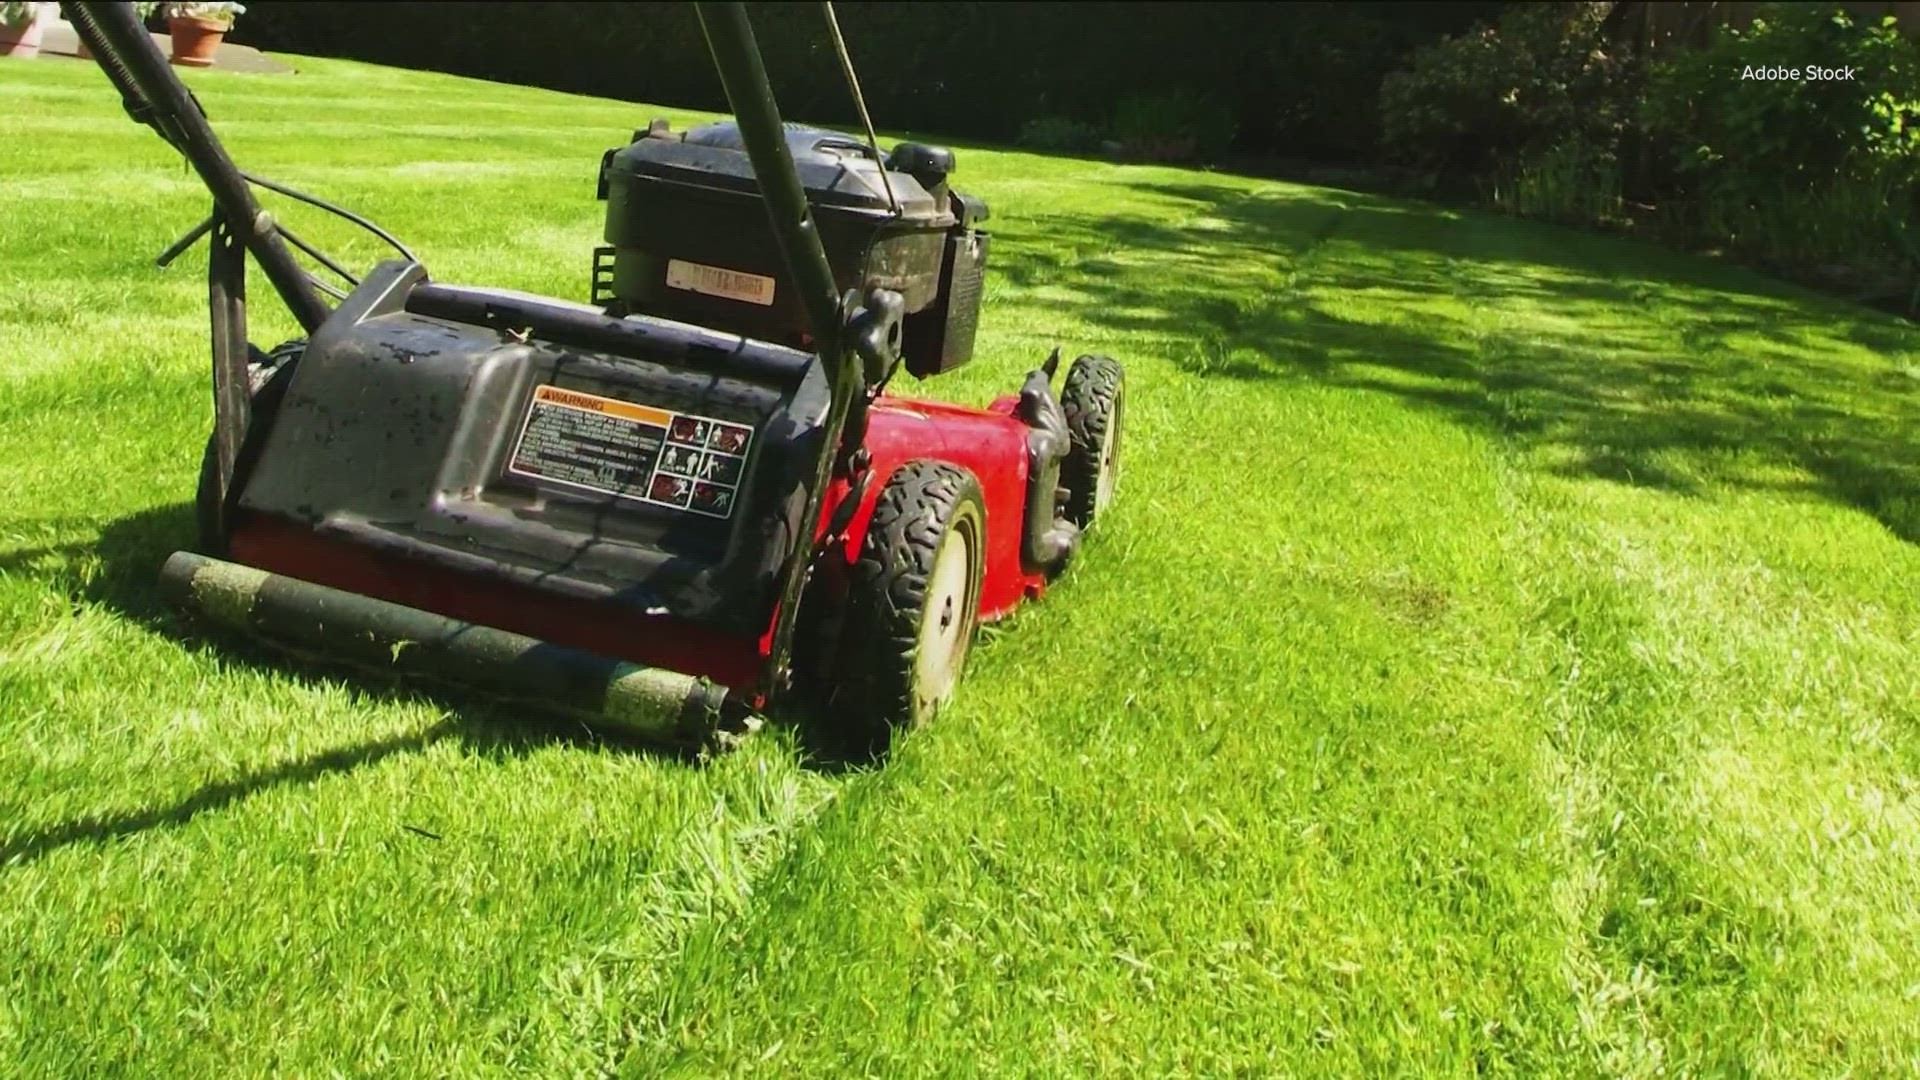 With the extremely hot weather we've been experiencing, you may want to think twice before storing your lawn mower or gas tanks in your garage.